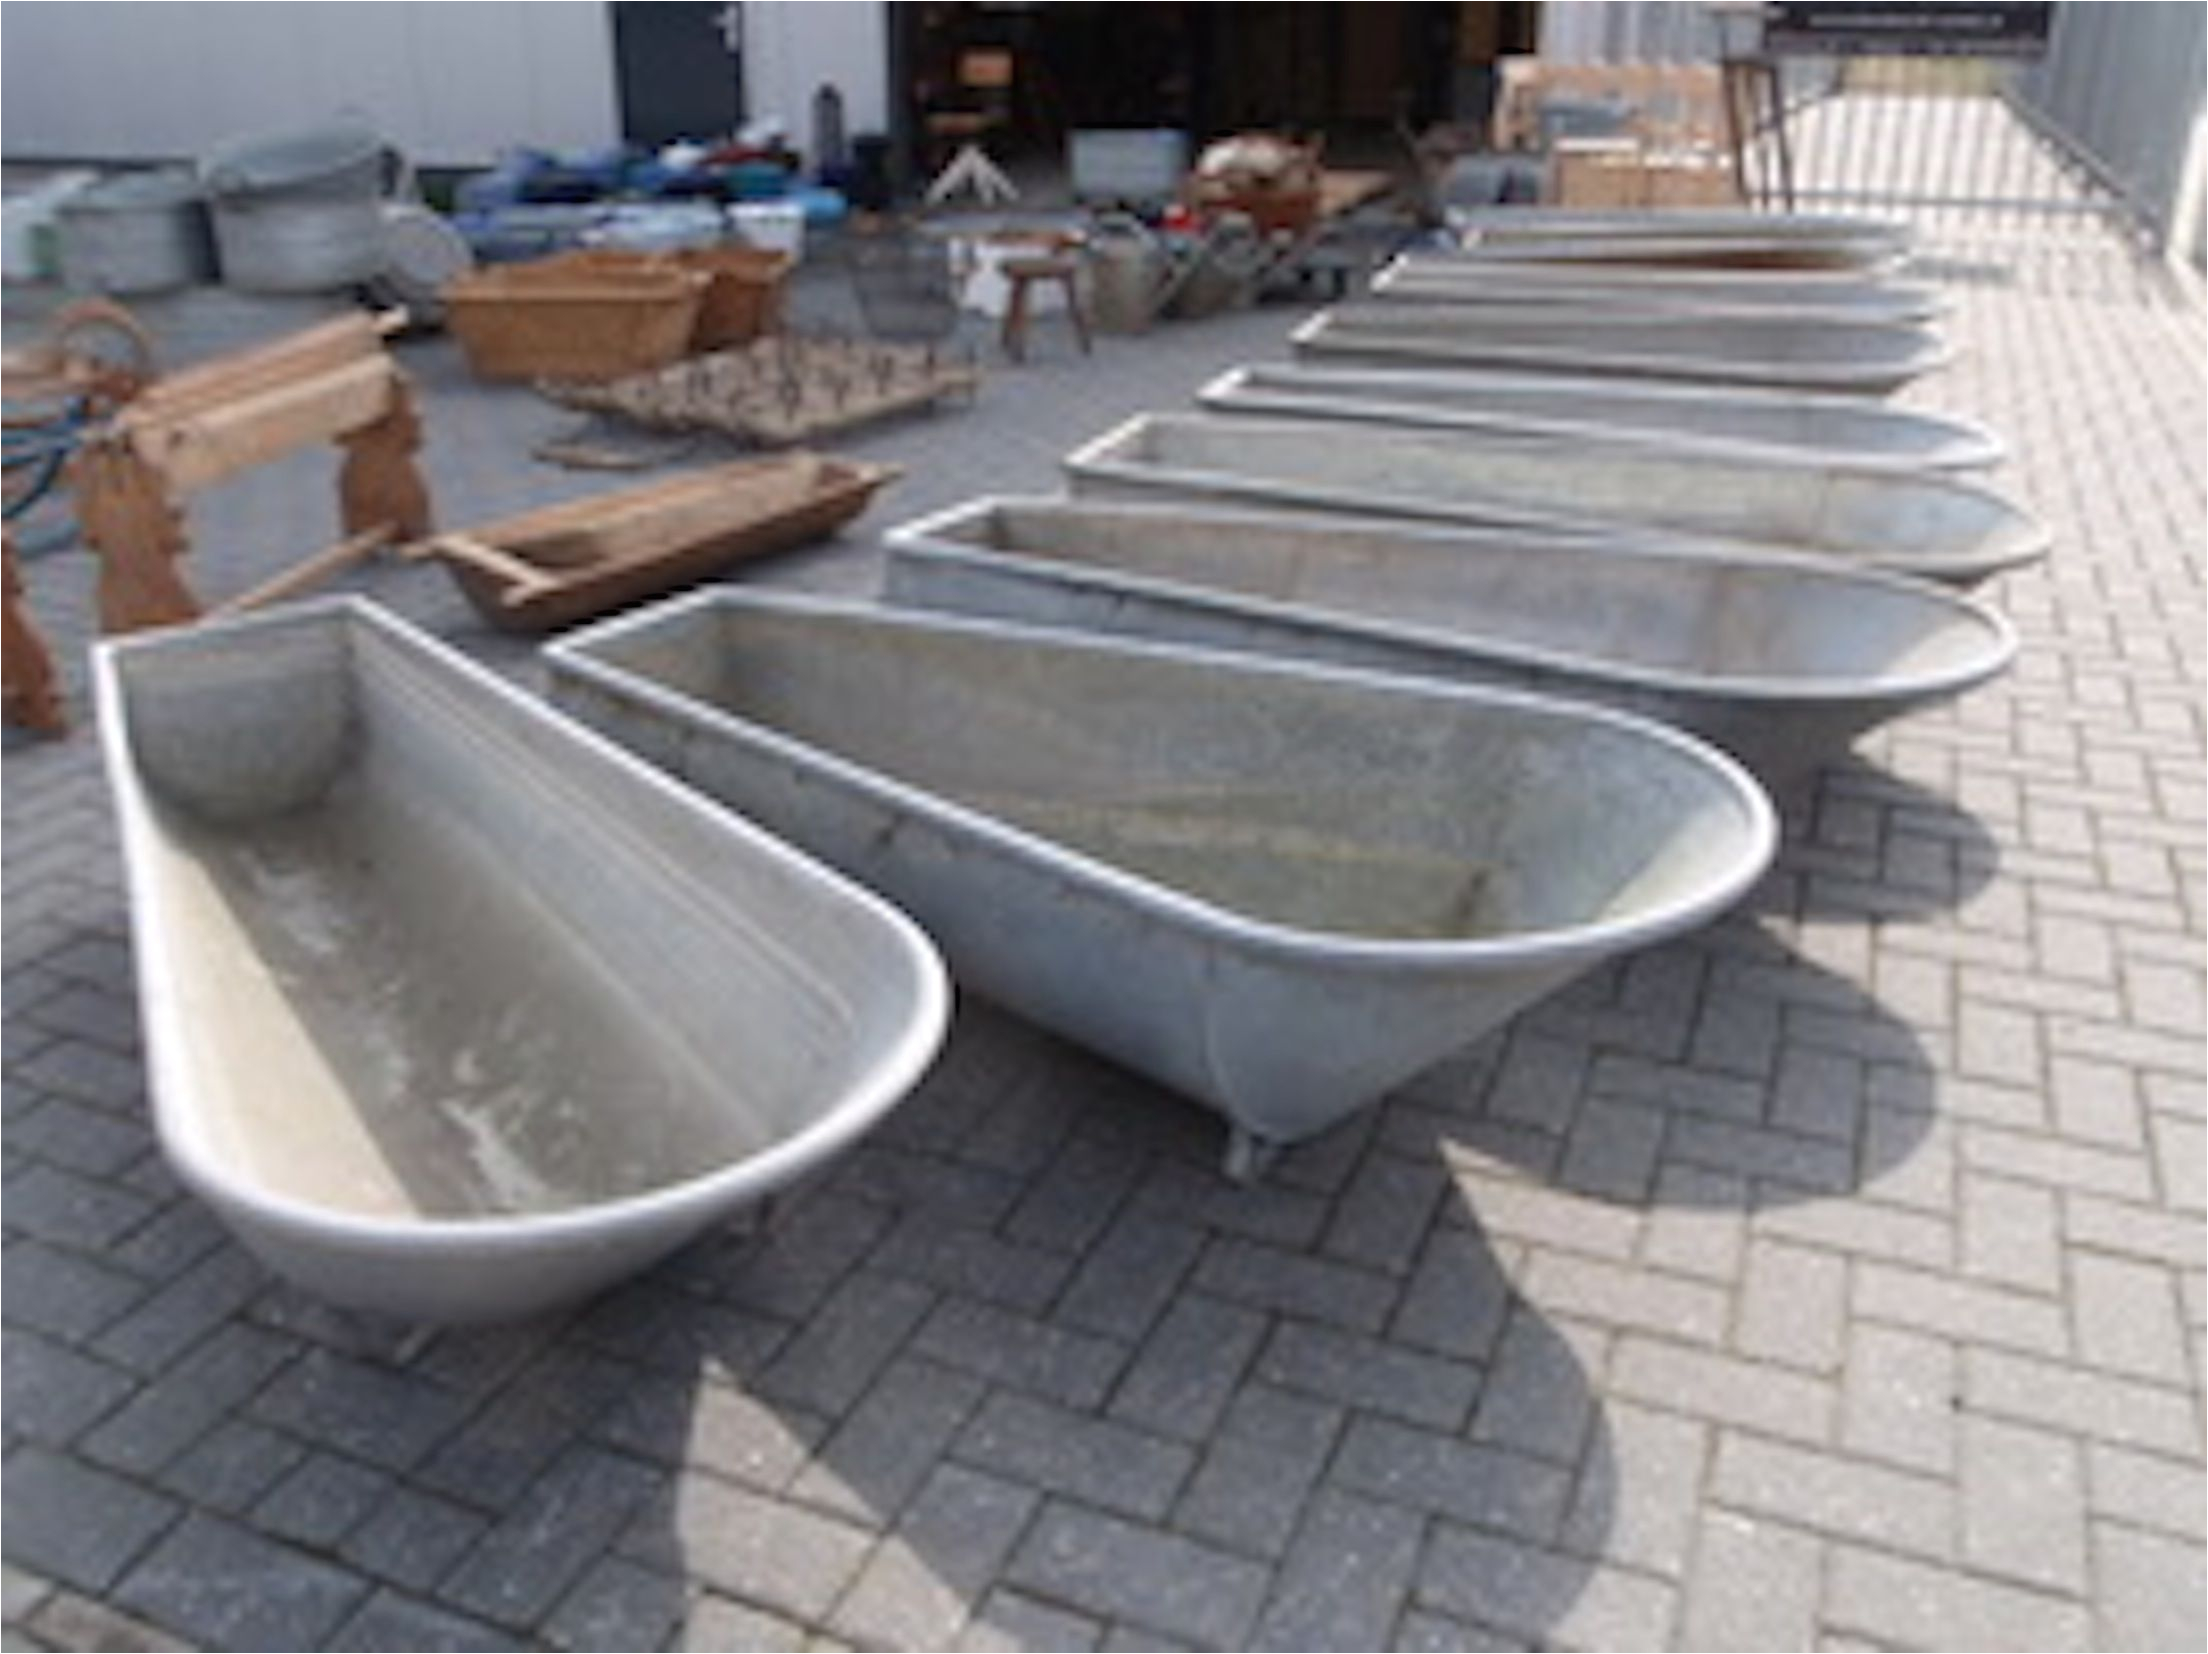 Outdoor Bathtub for Sale Australia Vintage Galvanized Bath Tubs From the 1940s and Earlier